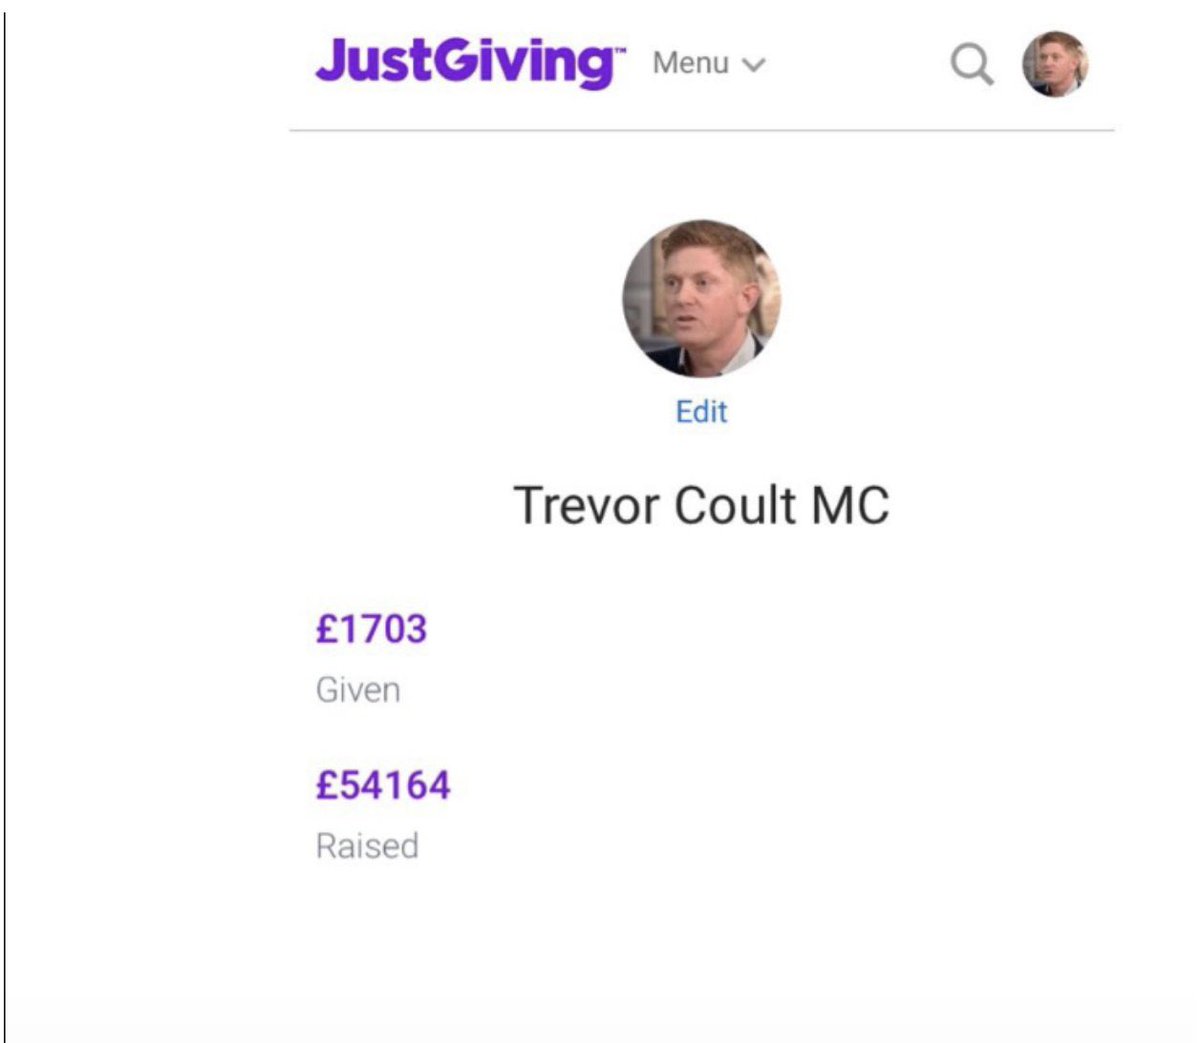 FIFTY FOUR THOUSAND ONE HUNDRED AND SIXTY FOUR POUNDS…
£1703 given. To who? 
And this is from JustGiving, and he was never a charity despite telling everyone who donated he was.